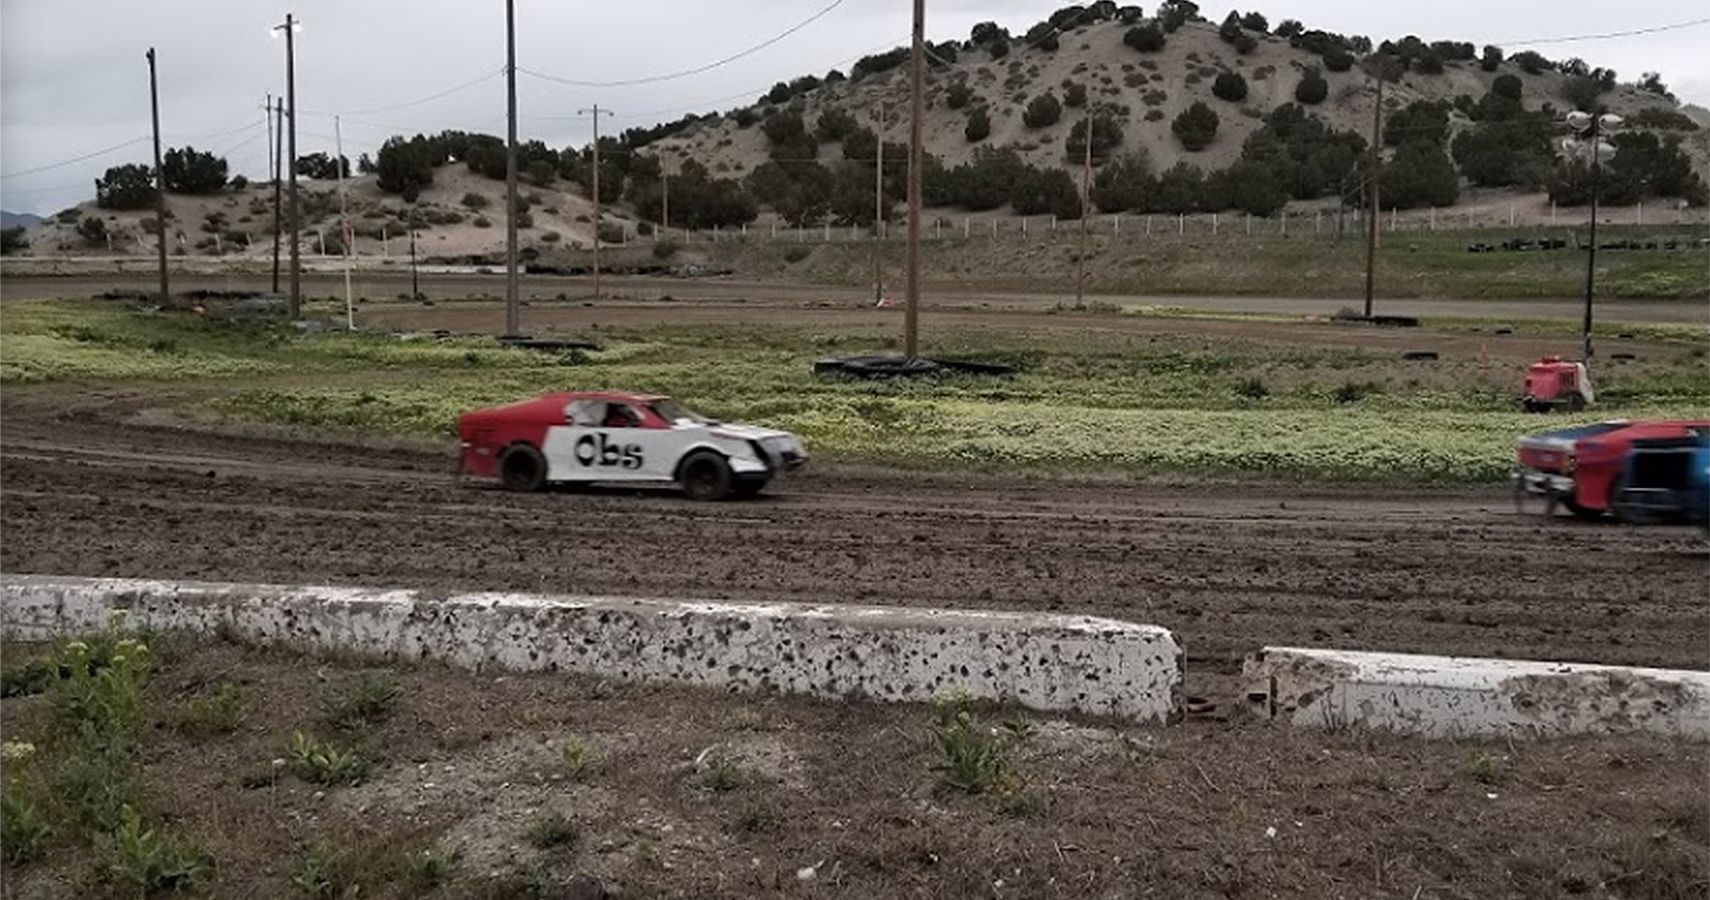 10 Awesome Race Tracks You'll Only Find In Nevada